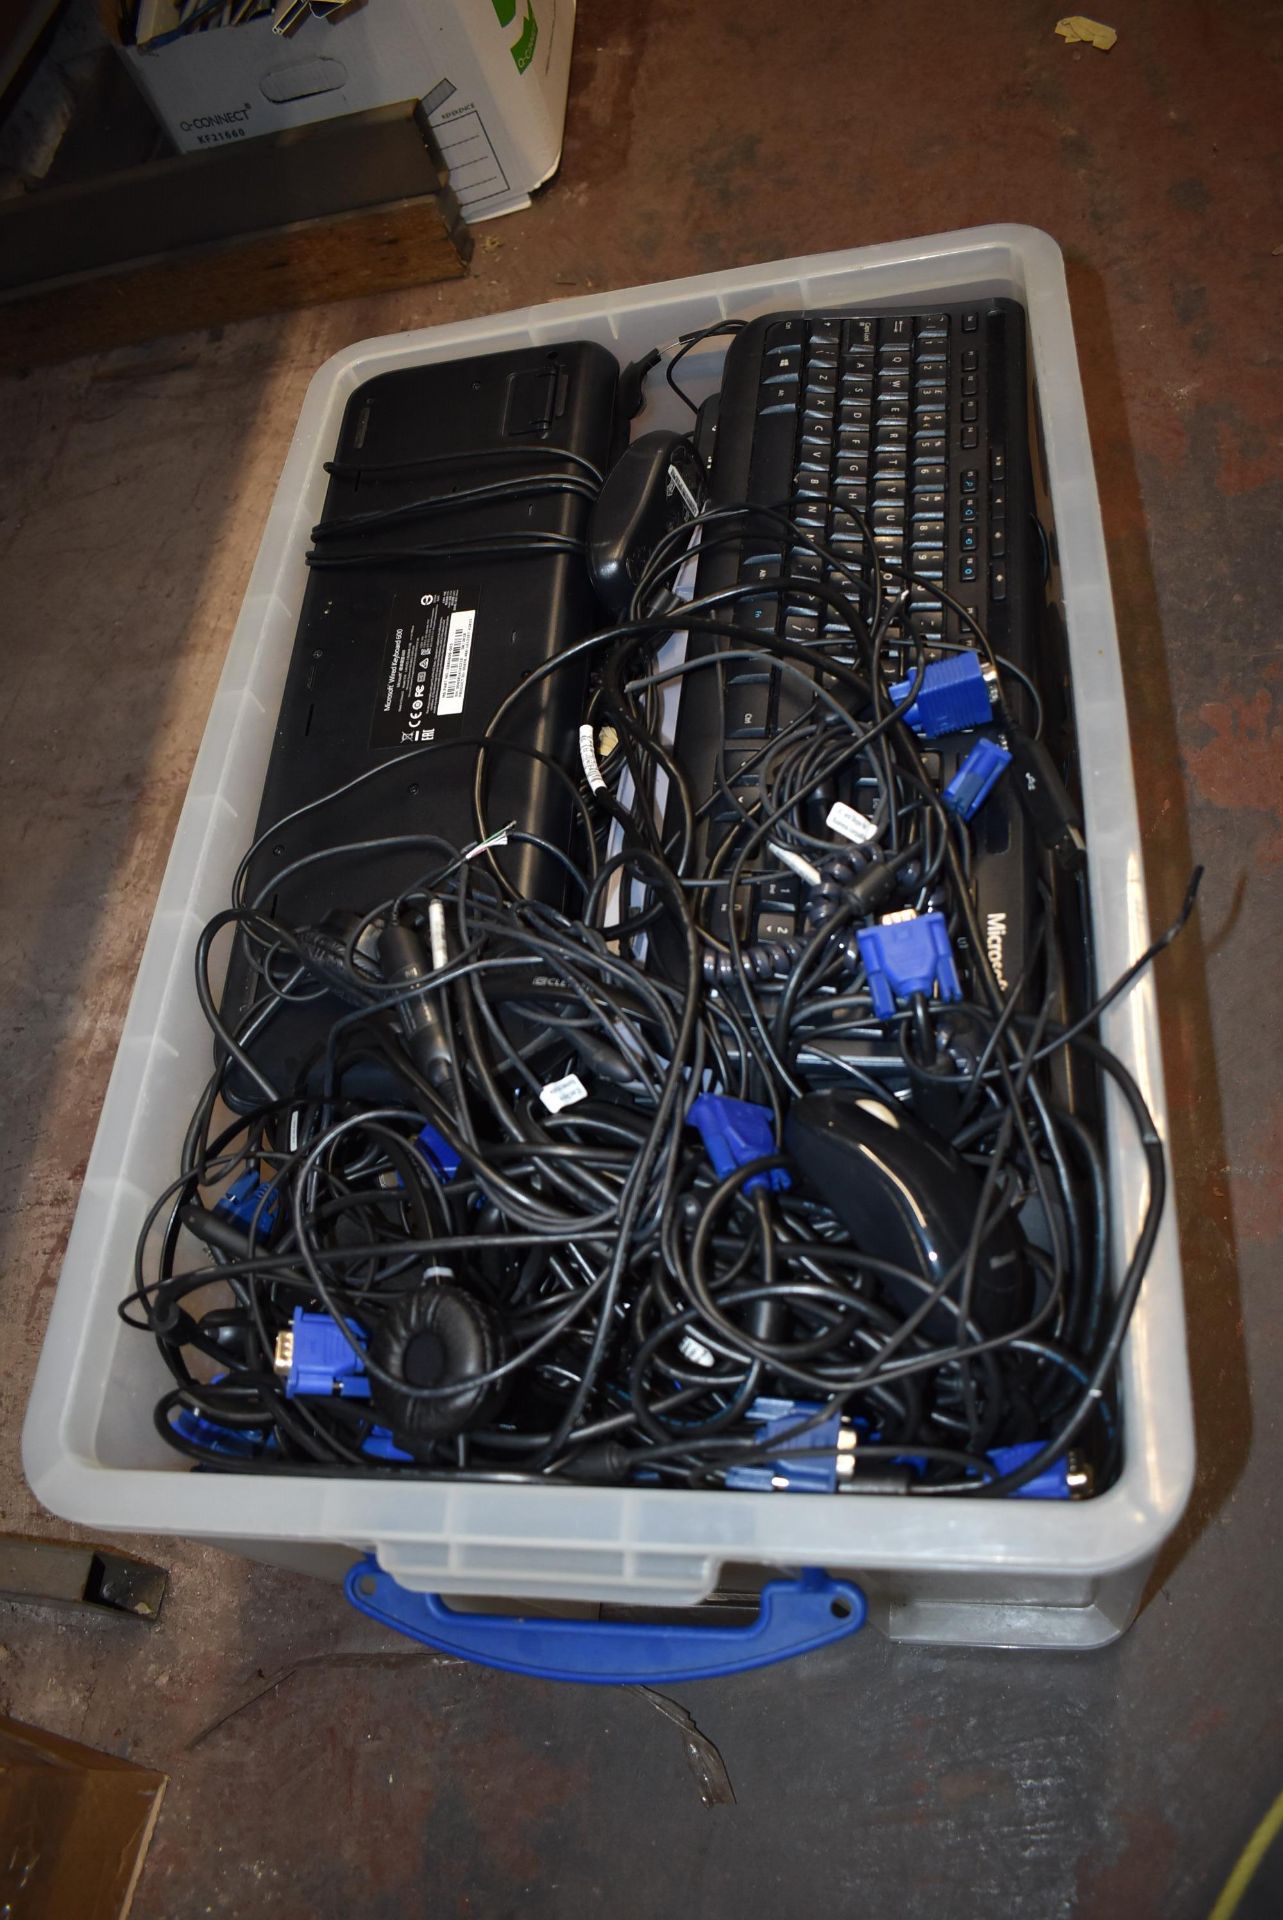 *Assorted Keyboards, Mice, Cables, etc. (box not included)